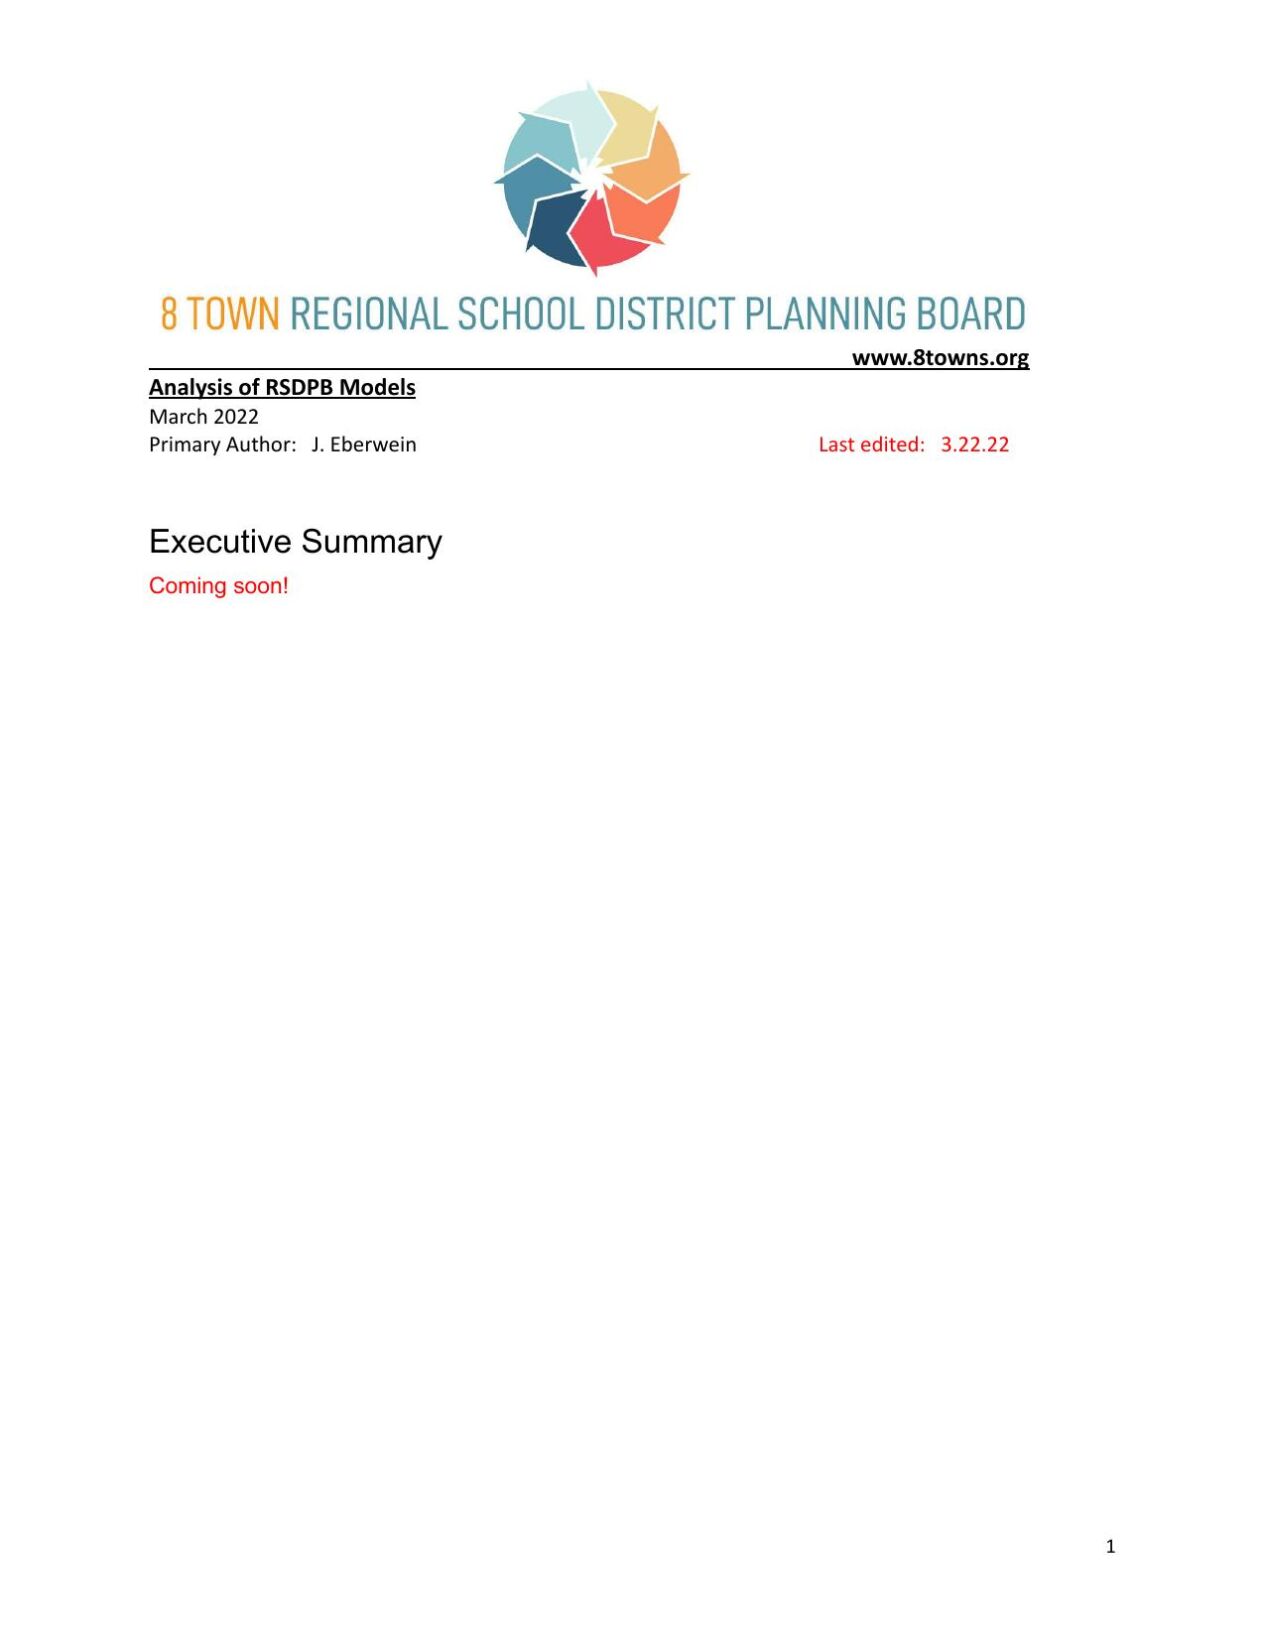 Consultant's report to the 8-Town Regional School District Planning Board